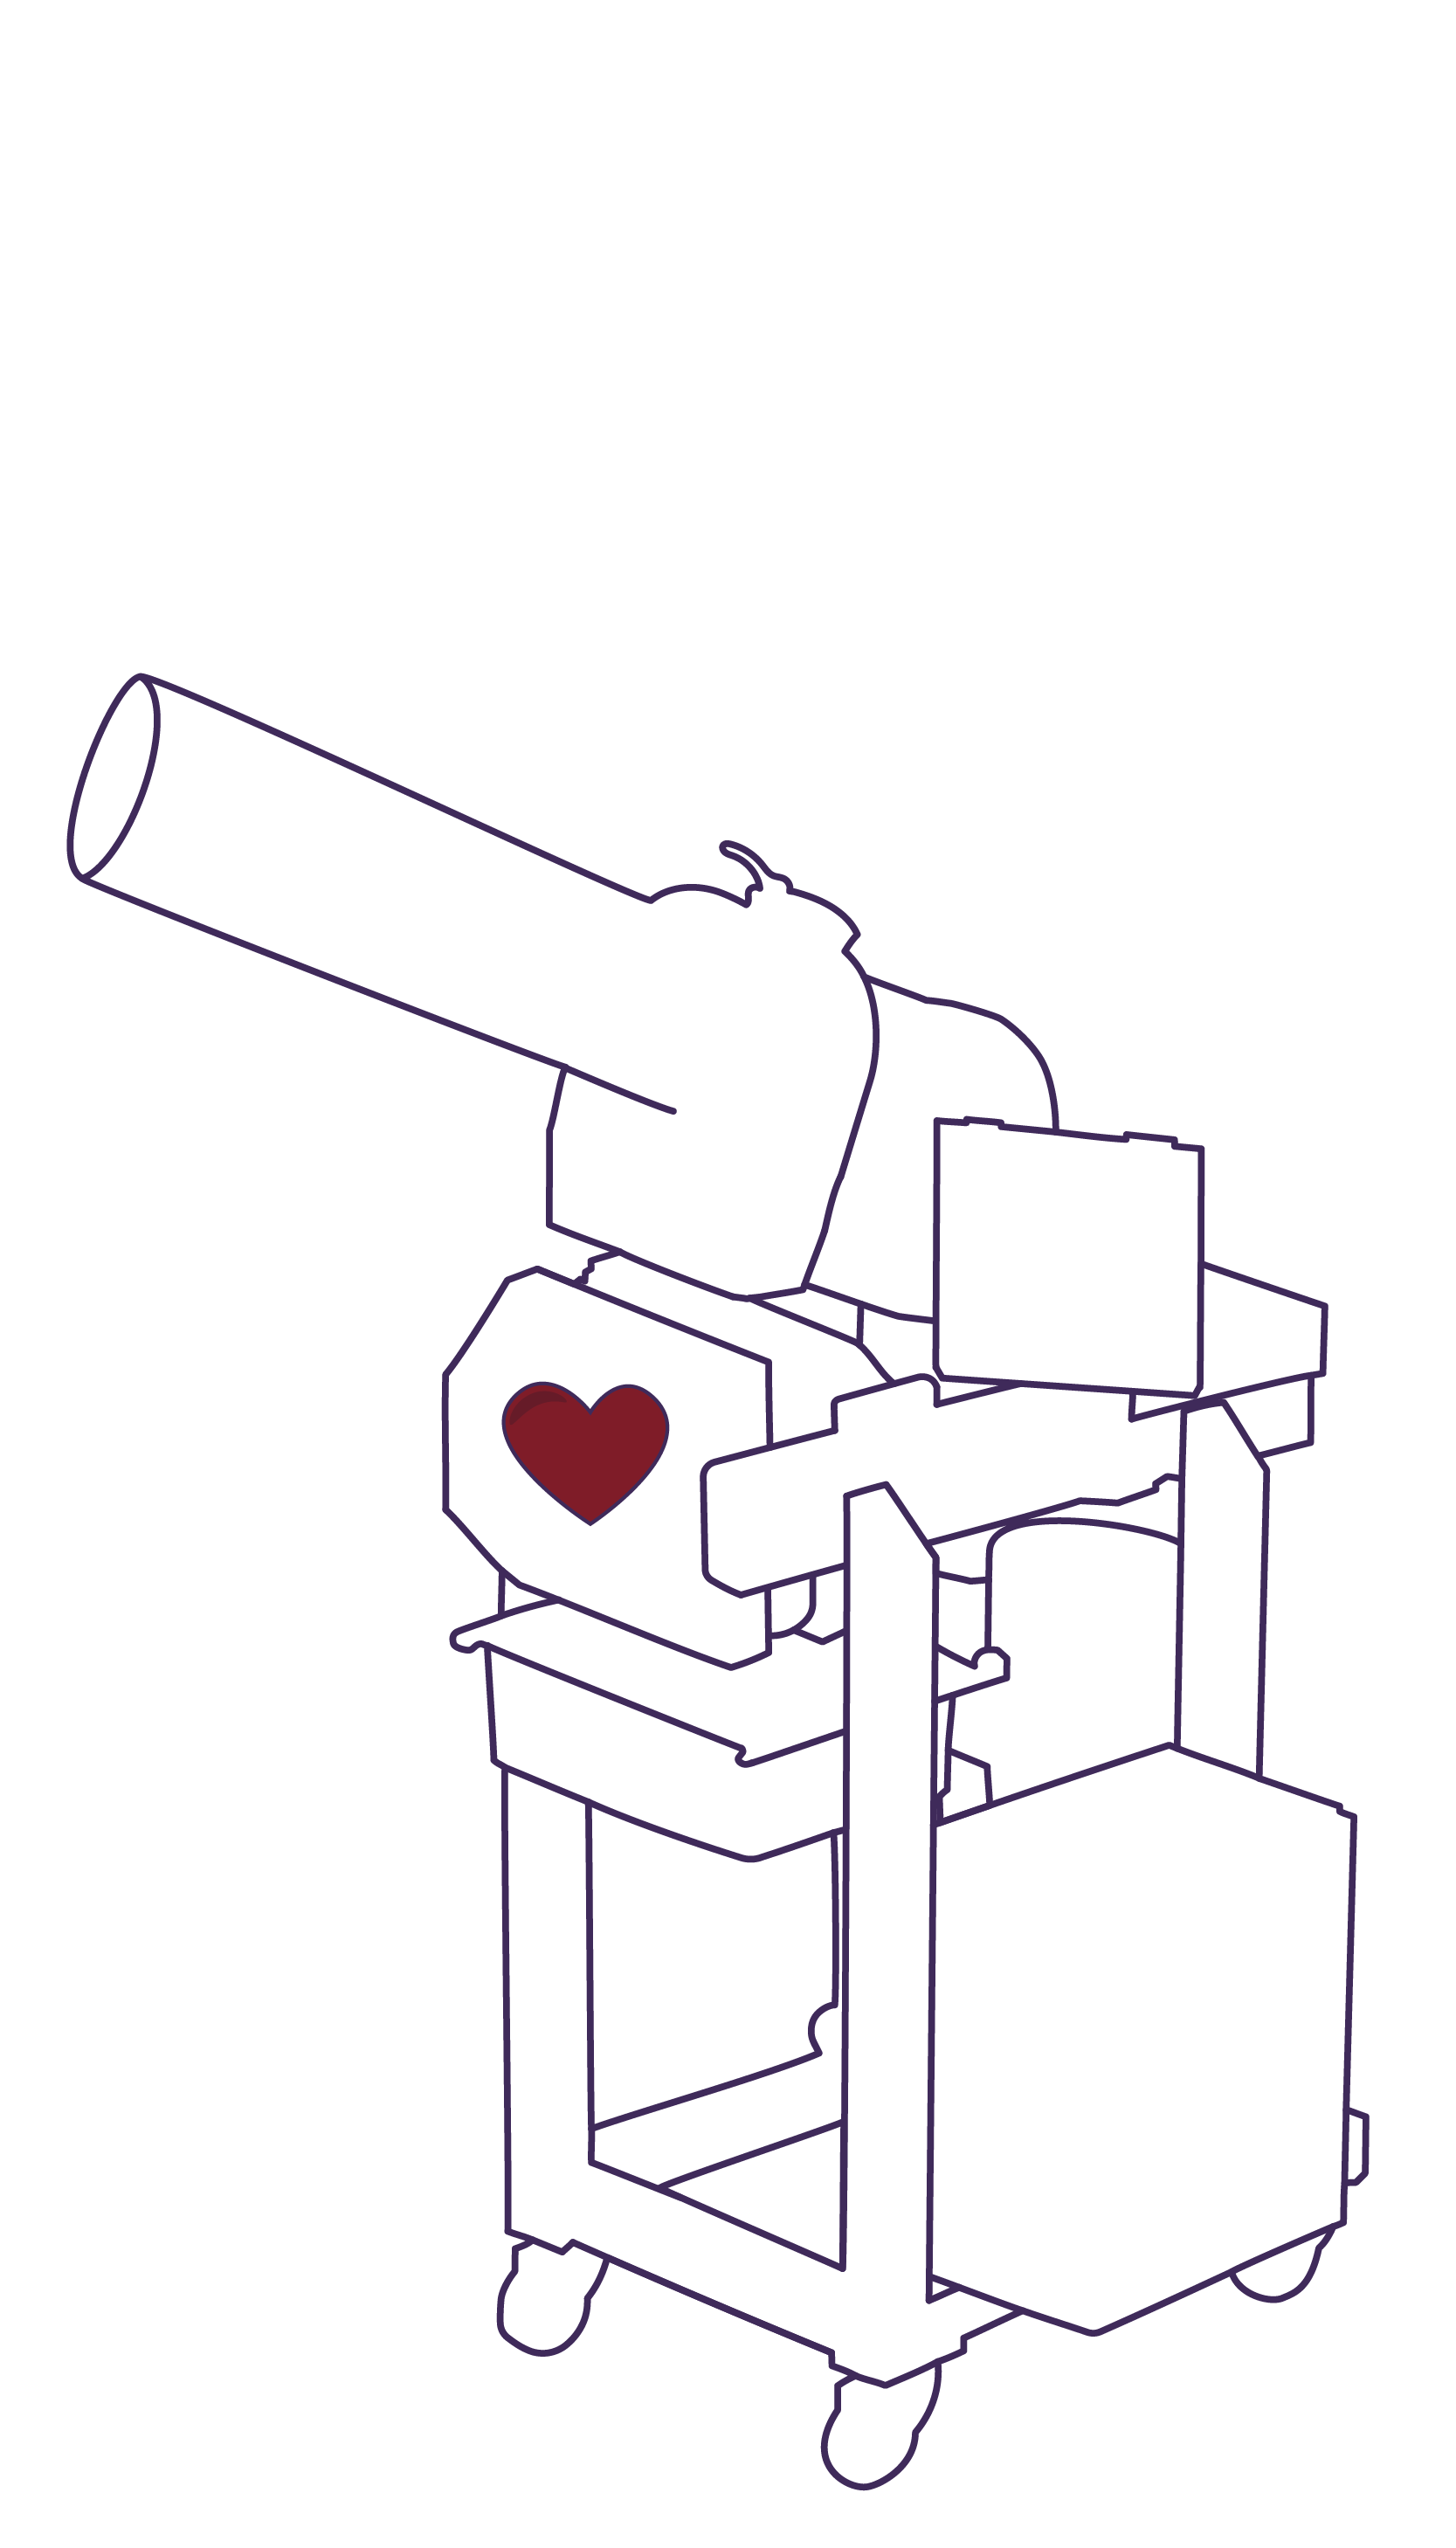 Machine Outline with a Heart